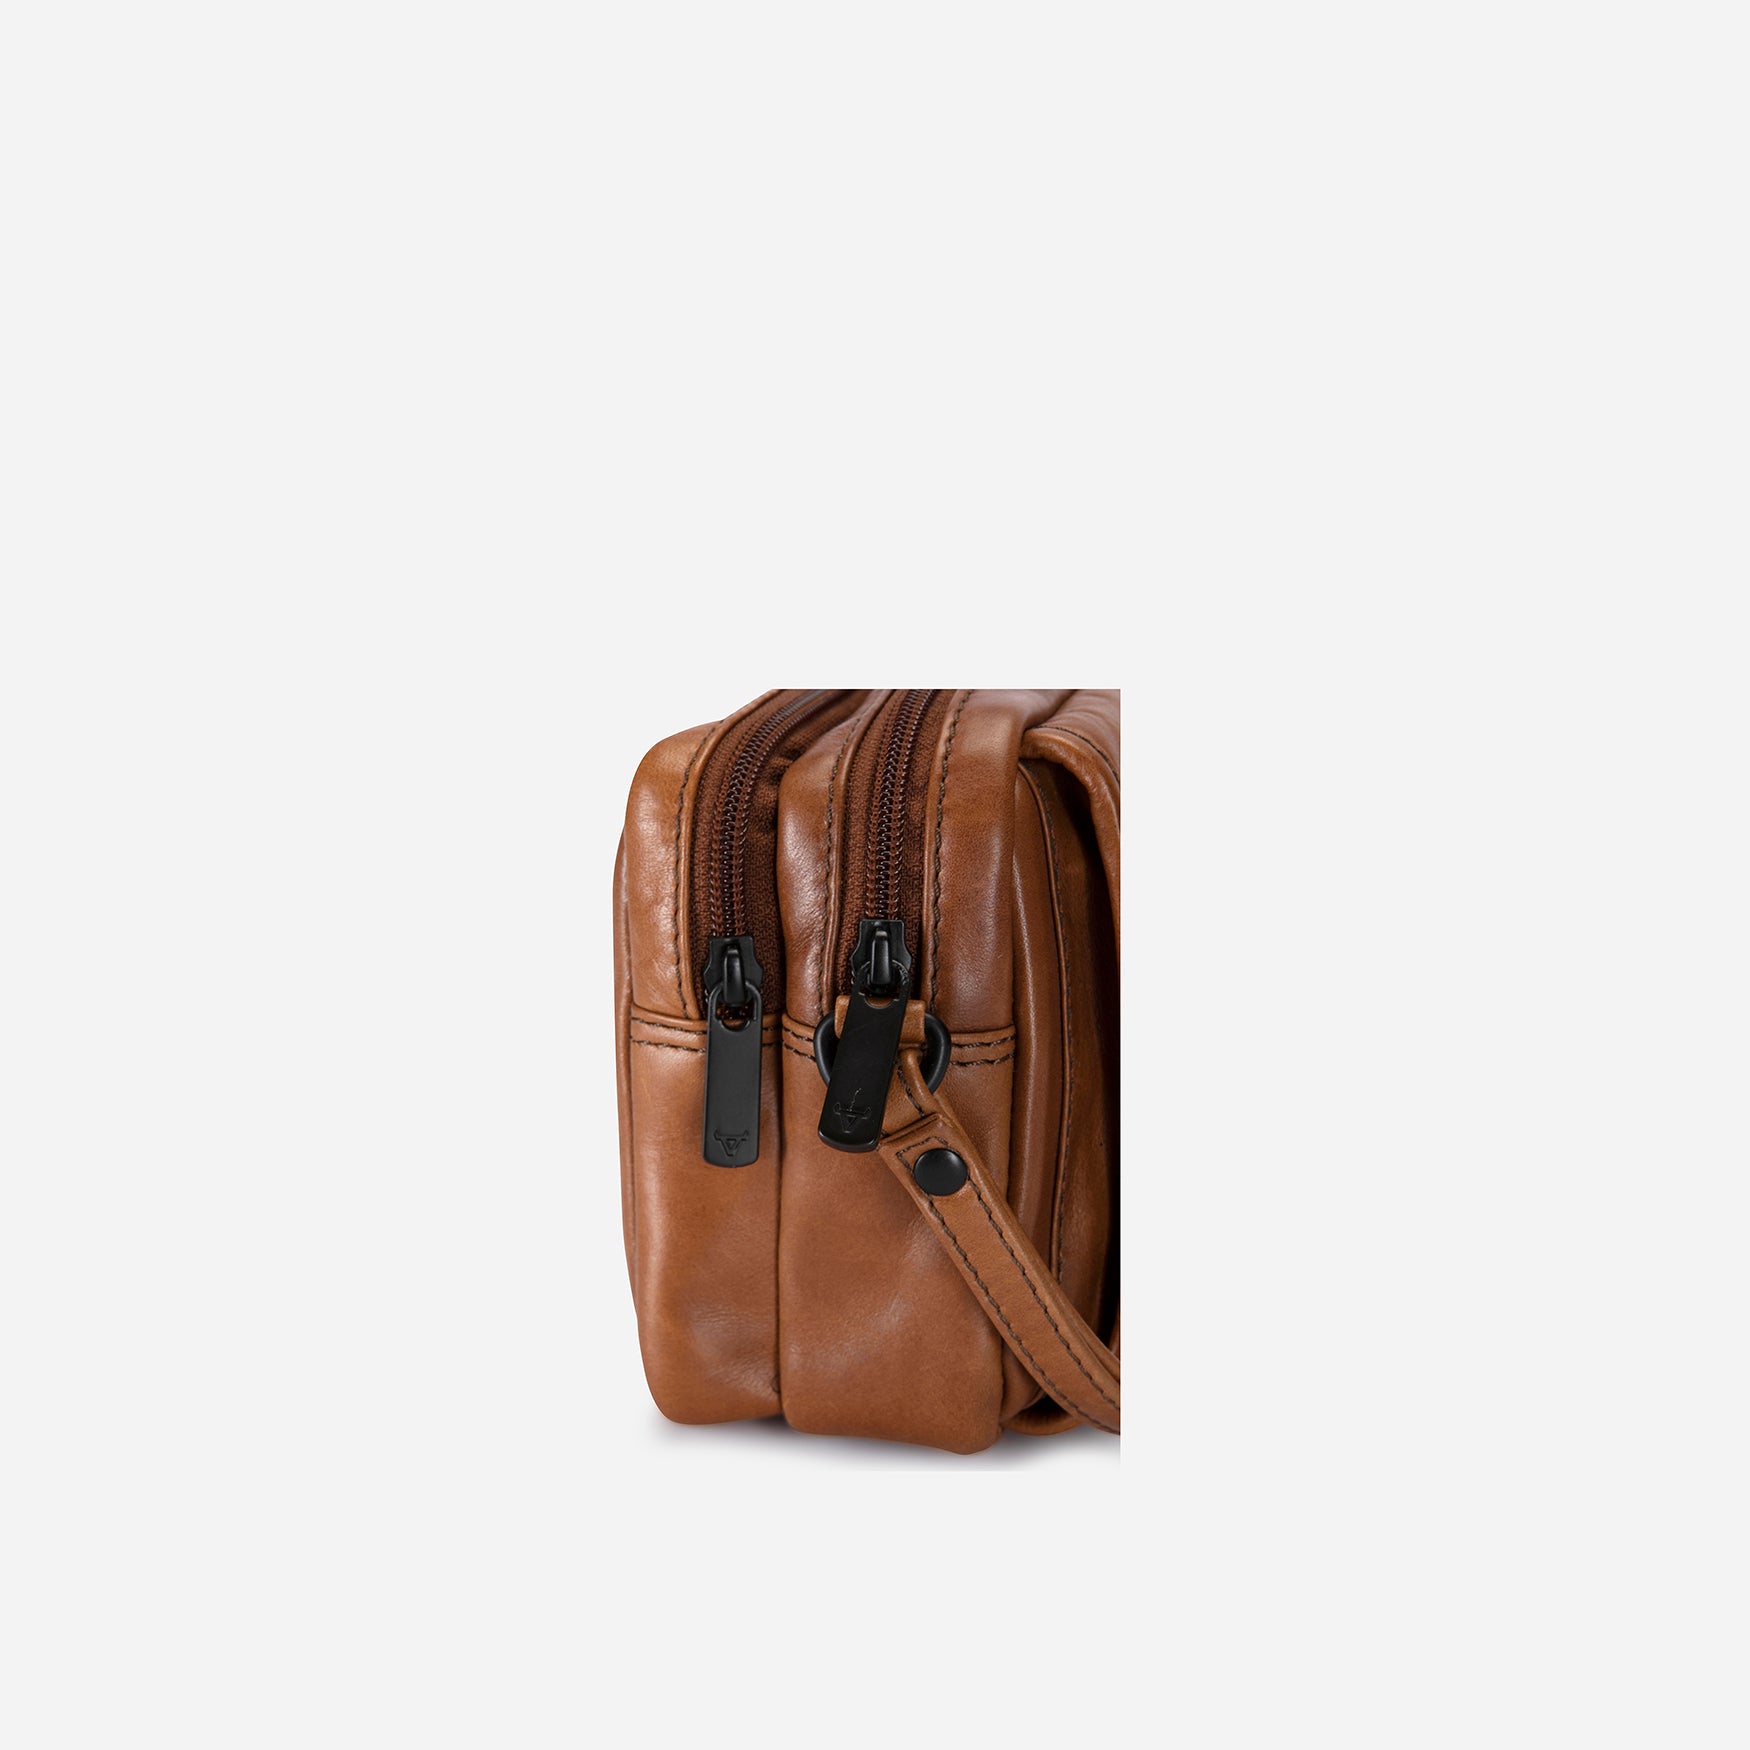 Gent's Bag With Hand Strap, Medium Brown